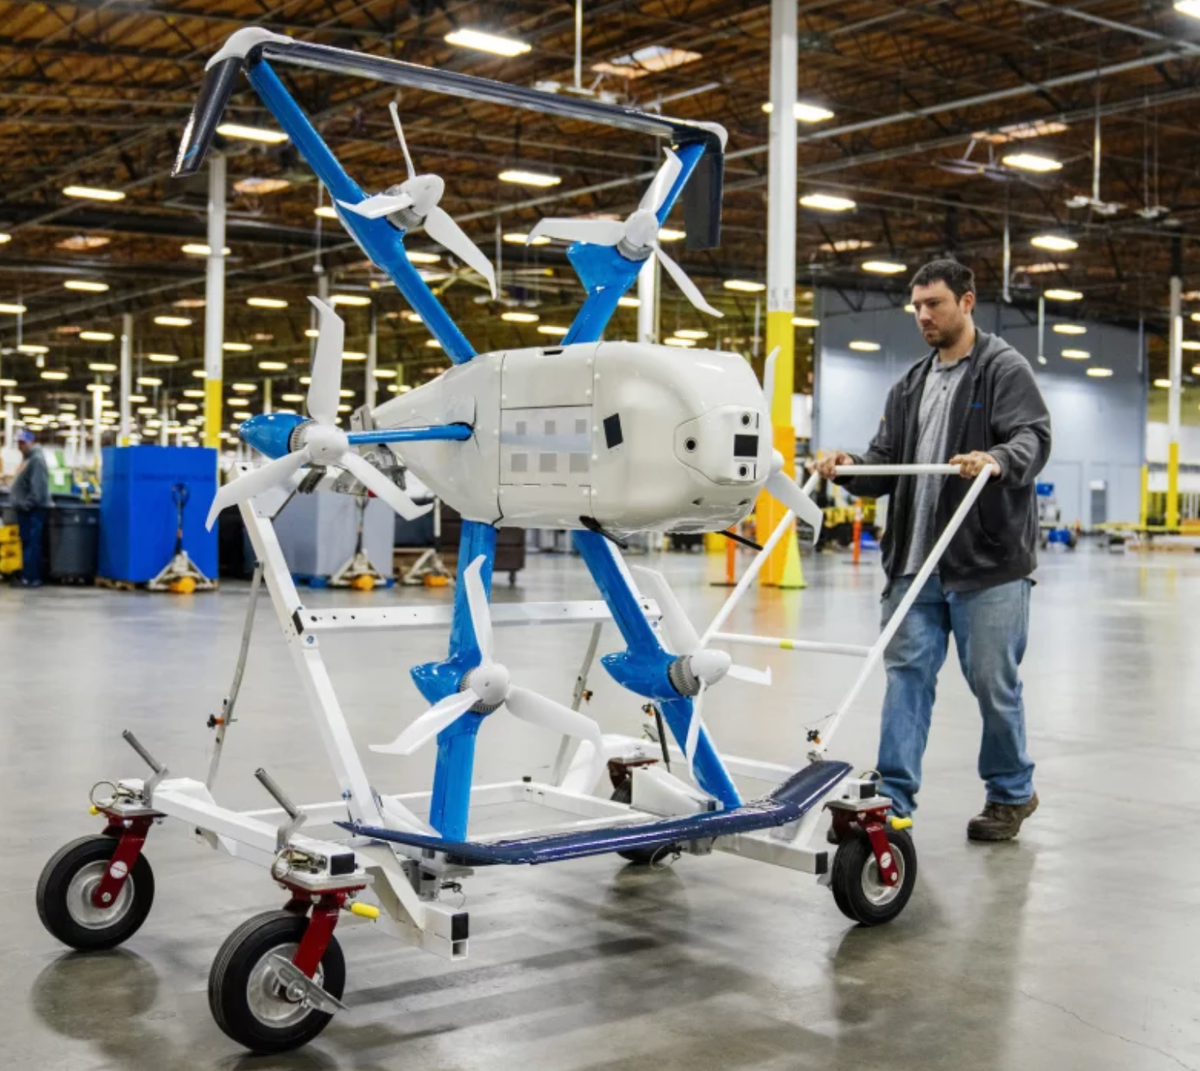 Amazon drone package delivery in 2024!